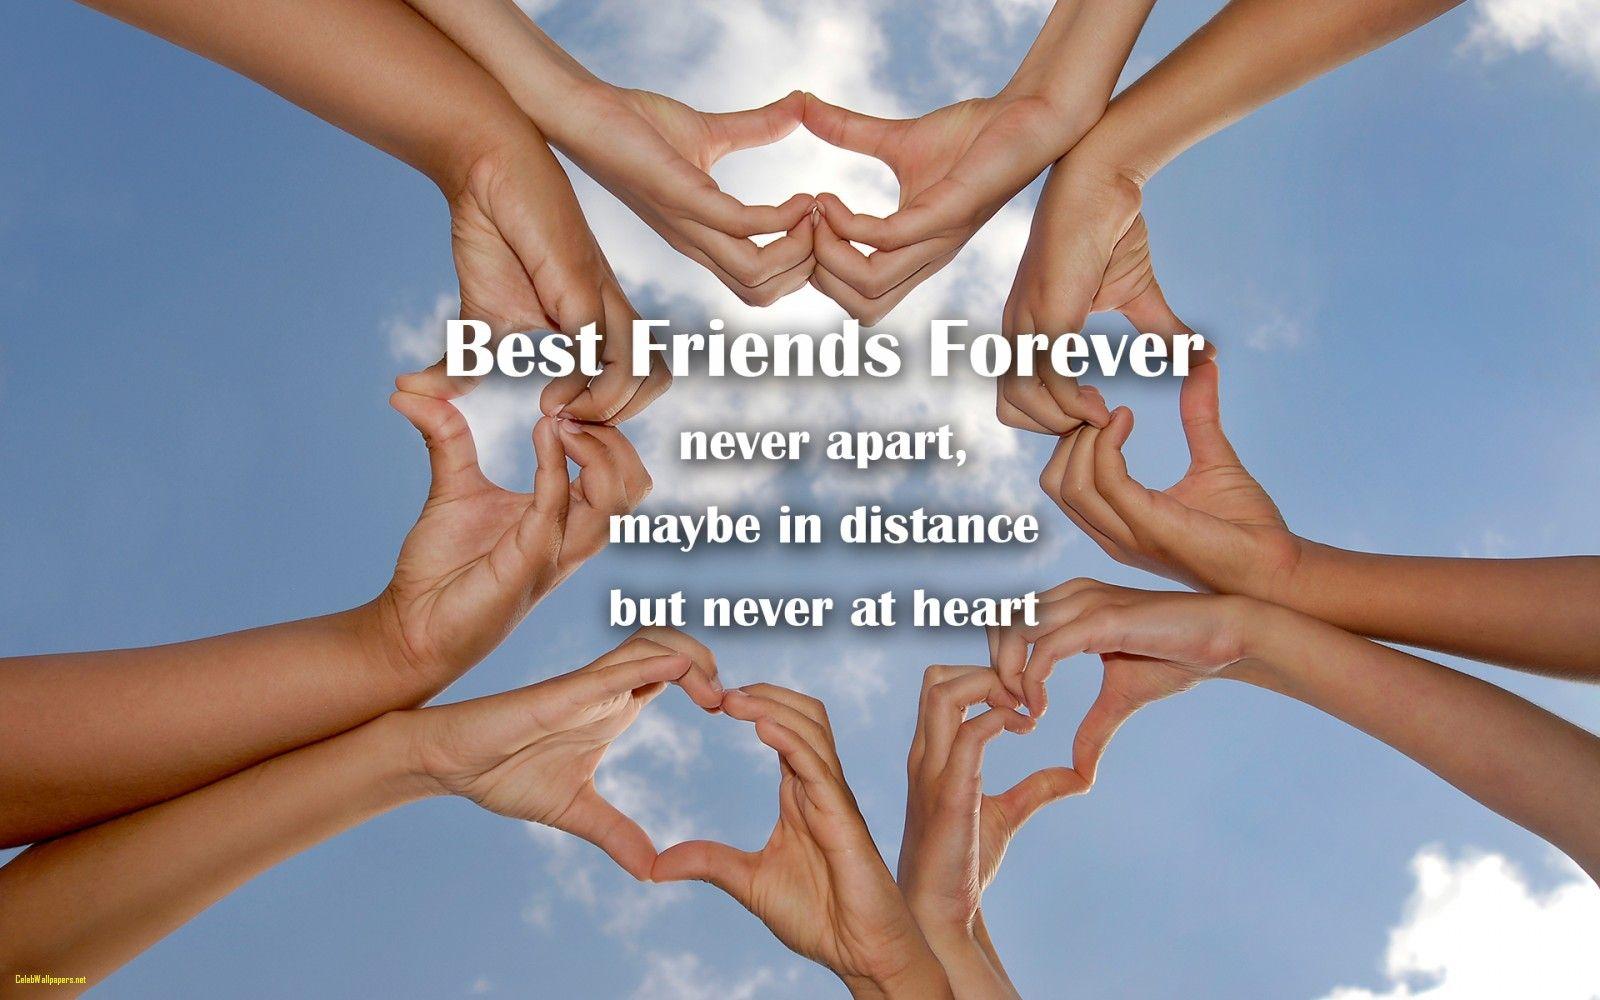 Friends forever Wallpaper Best Friends forever Quotes Image